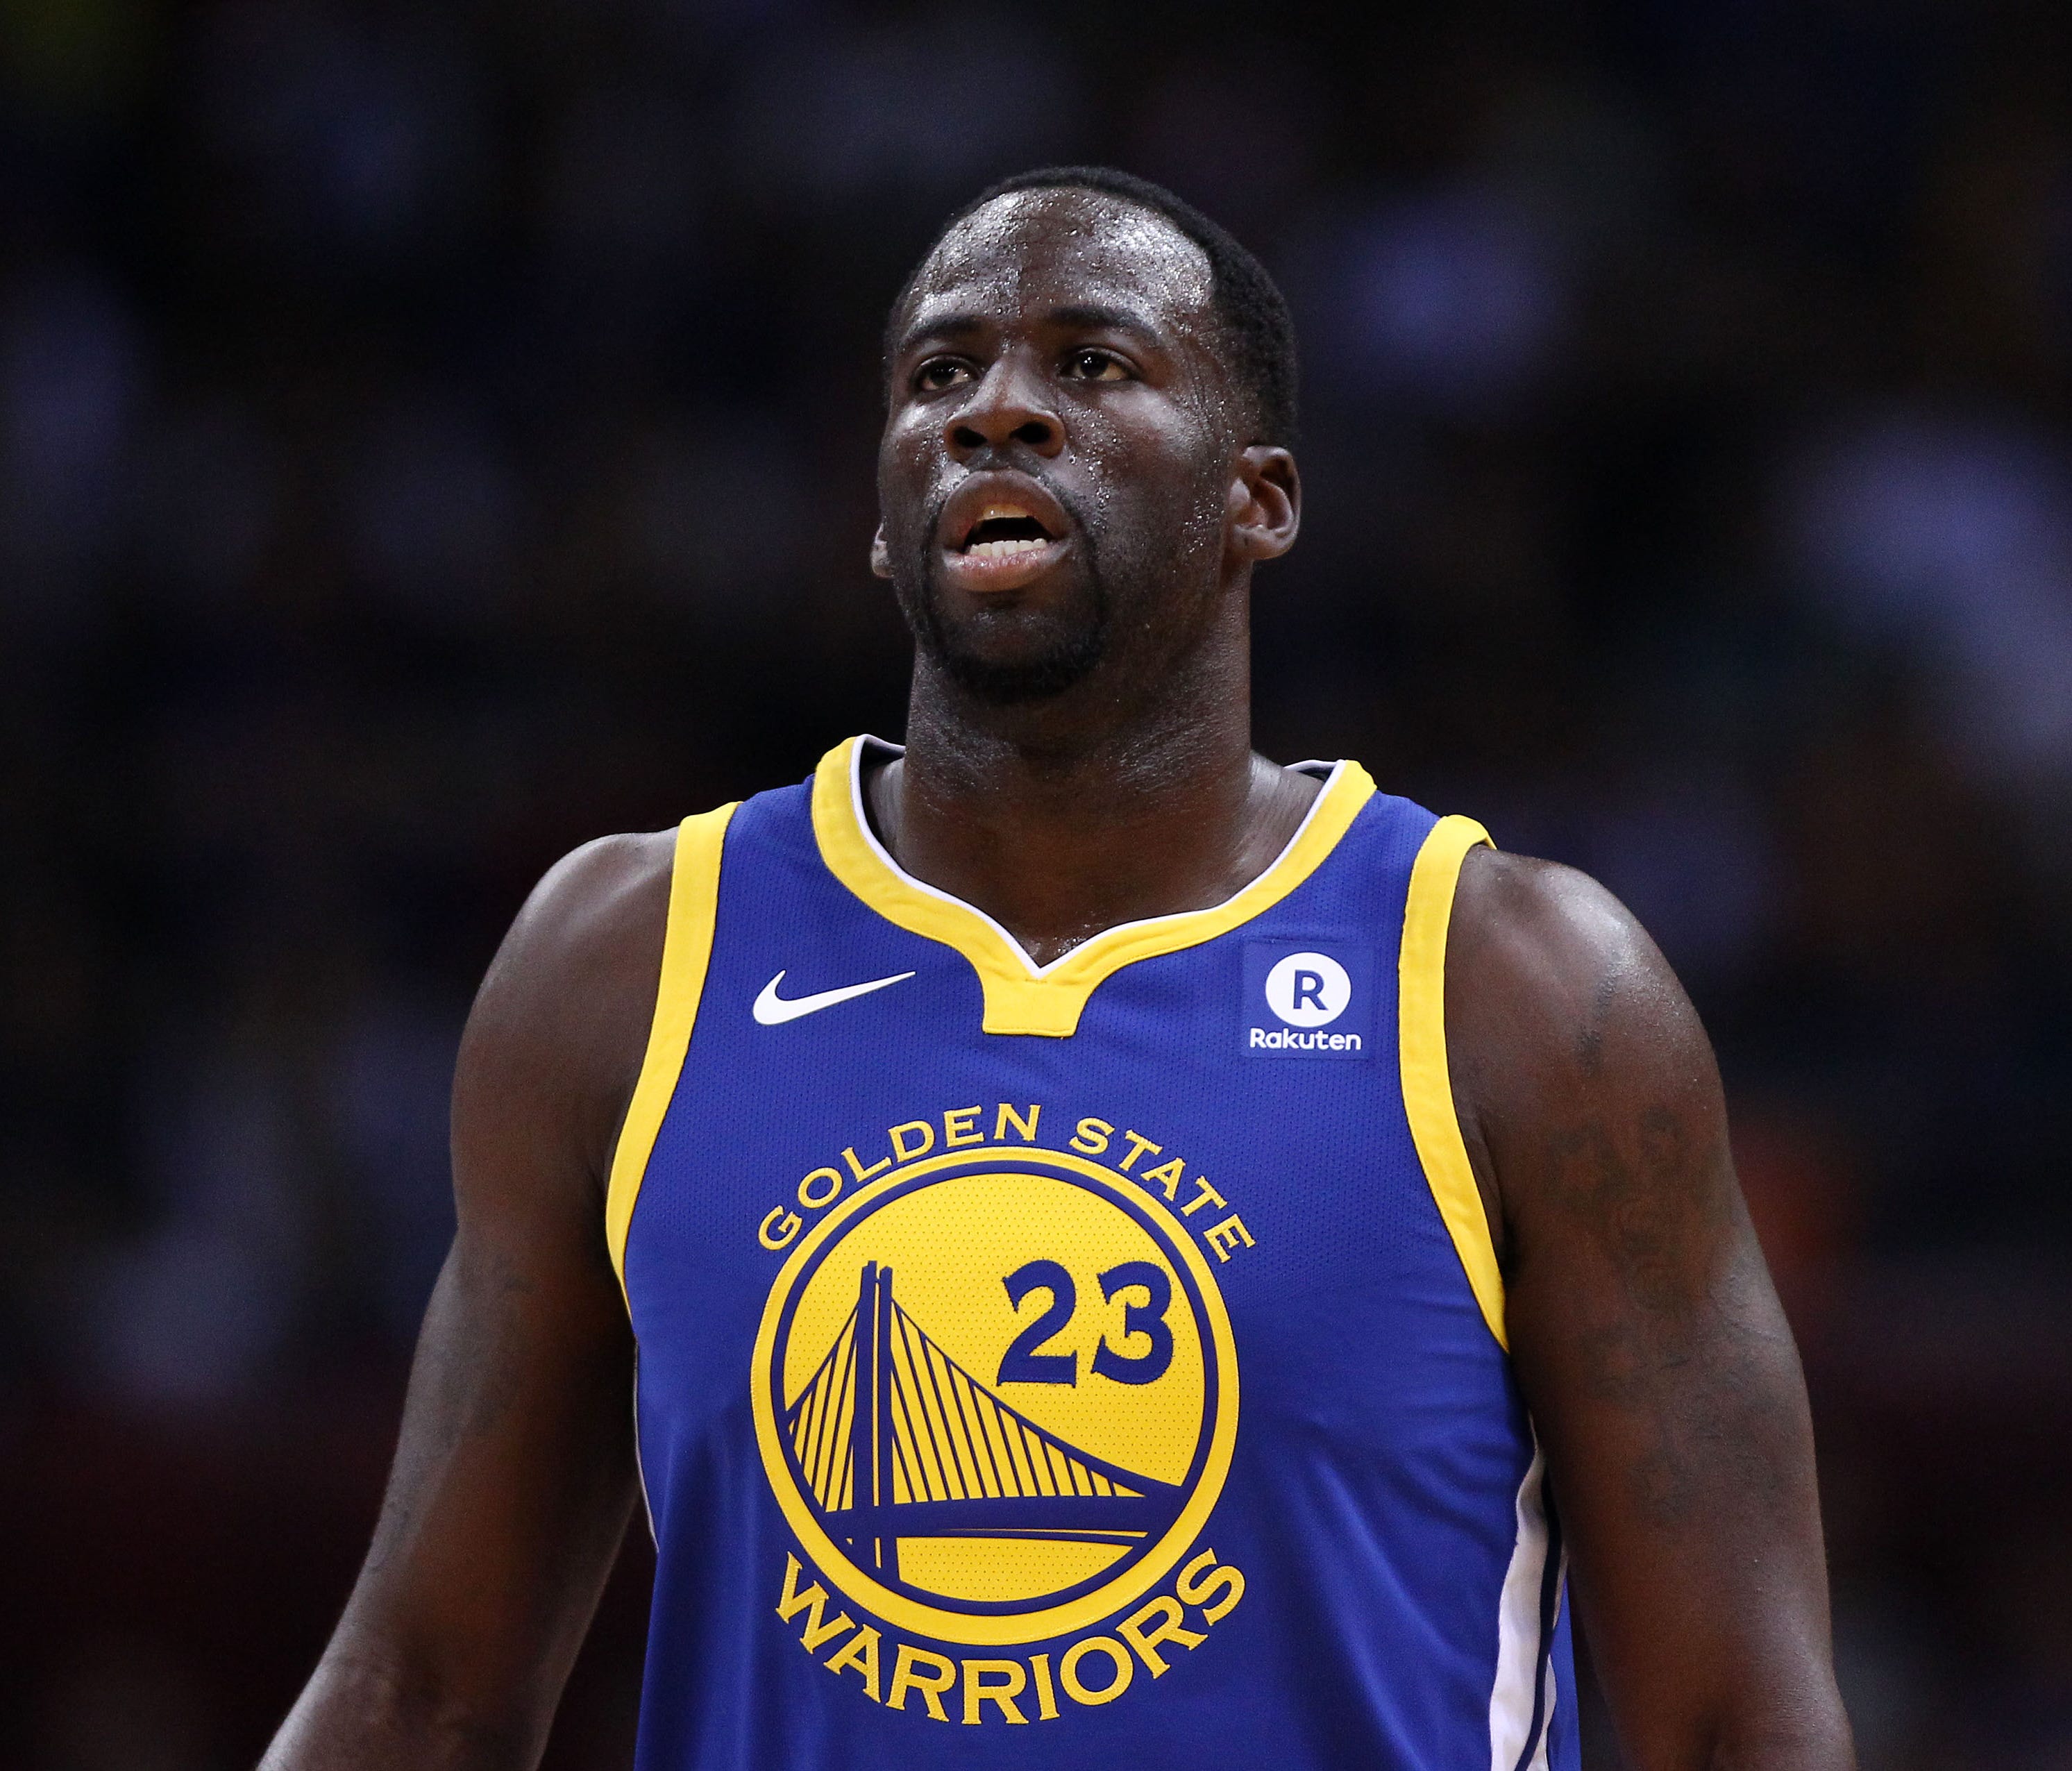 Draymond Green of the Warriors looks on during the game against the Timberwolves in Shenzhen, China.